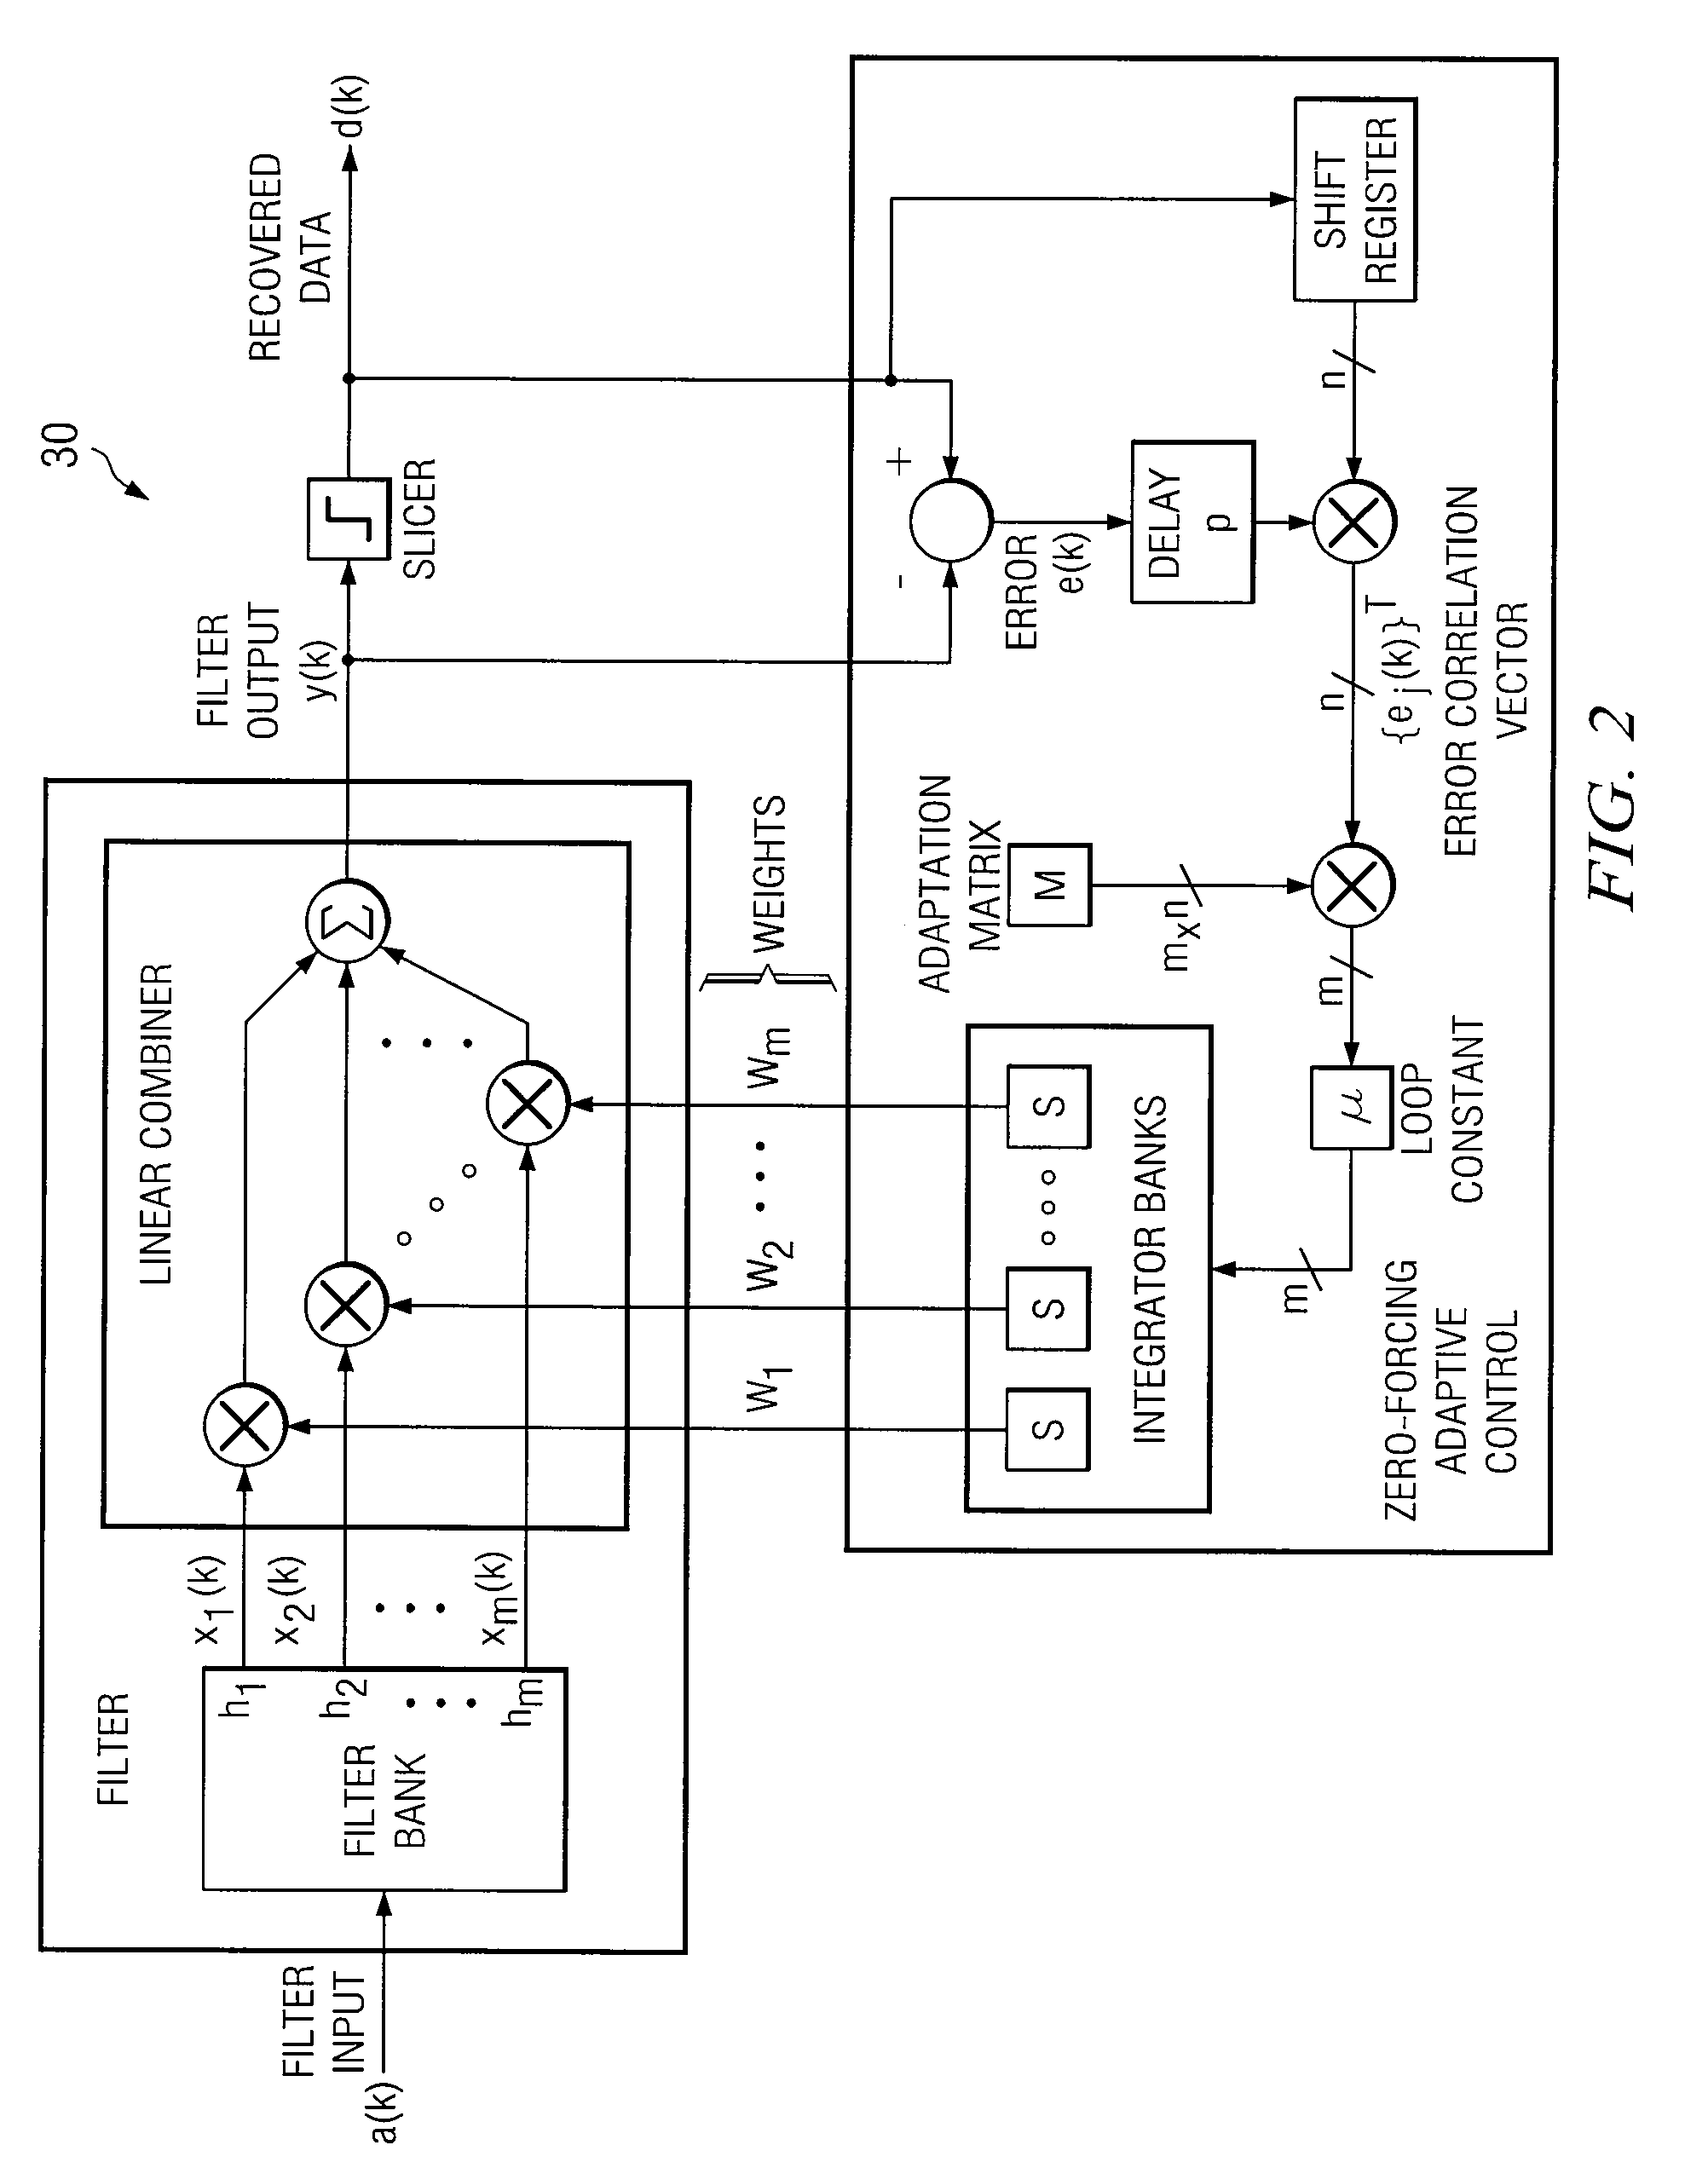 Method and System for On-Line Data-Pattern Compensated Adaptive Equalizer Control